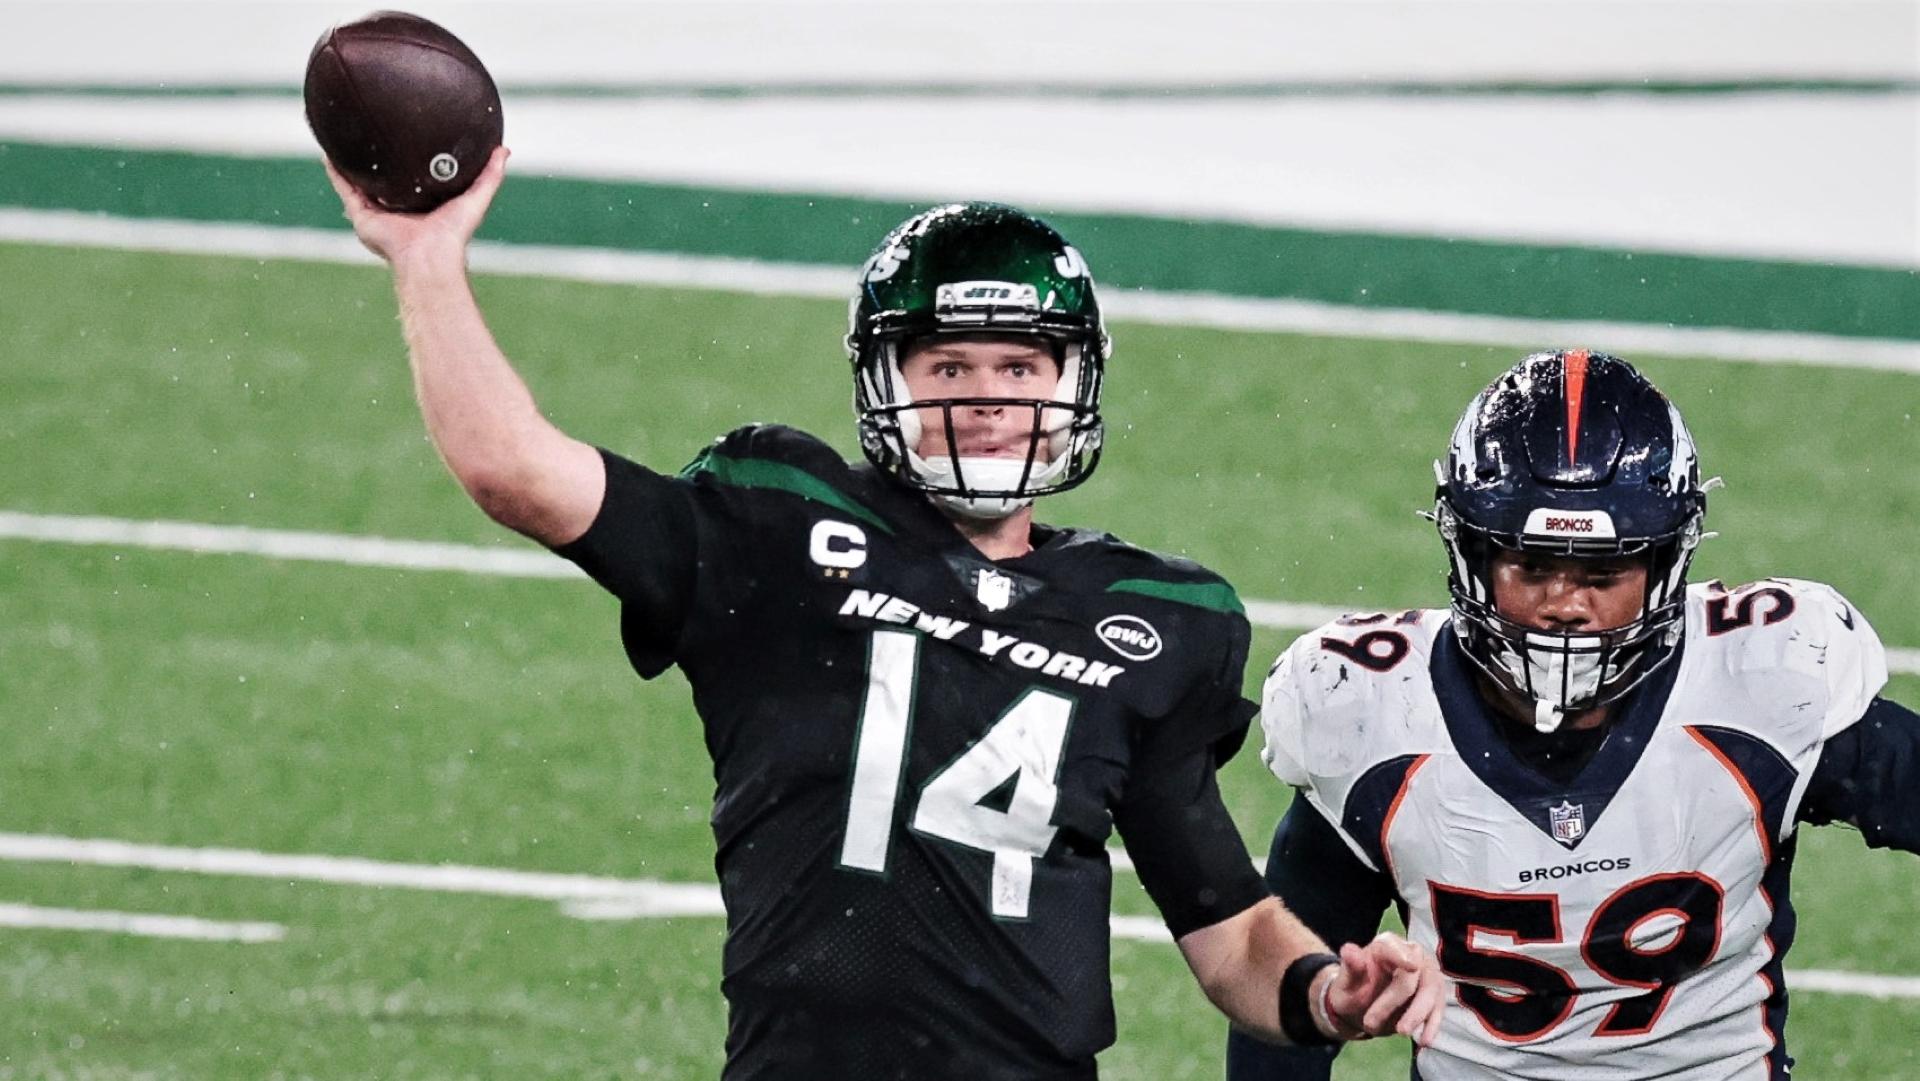 Oct 1, 2020; East Rutherford, New Jersey, USA; New York Jets quarterback Sam Darnold (14) throws the ball as Denver Broncos linebacker Malik Reed (59) pursues during the second half at MetLife Stadium. Mandatory Credit: Vincent Carchietta-USA TODAY Sports / © Vincent Carchietta-USA TODAY Sports